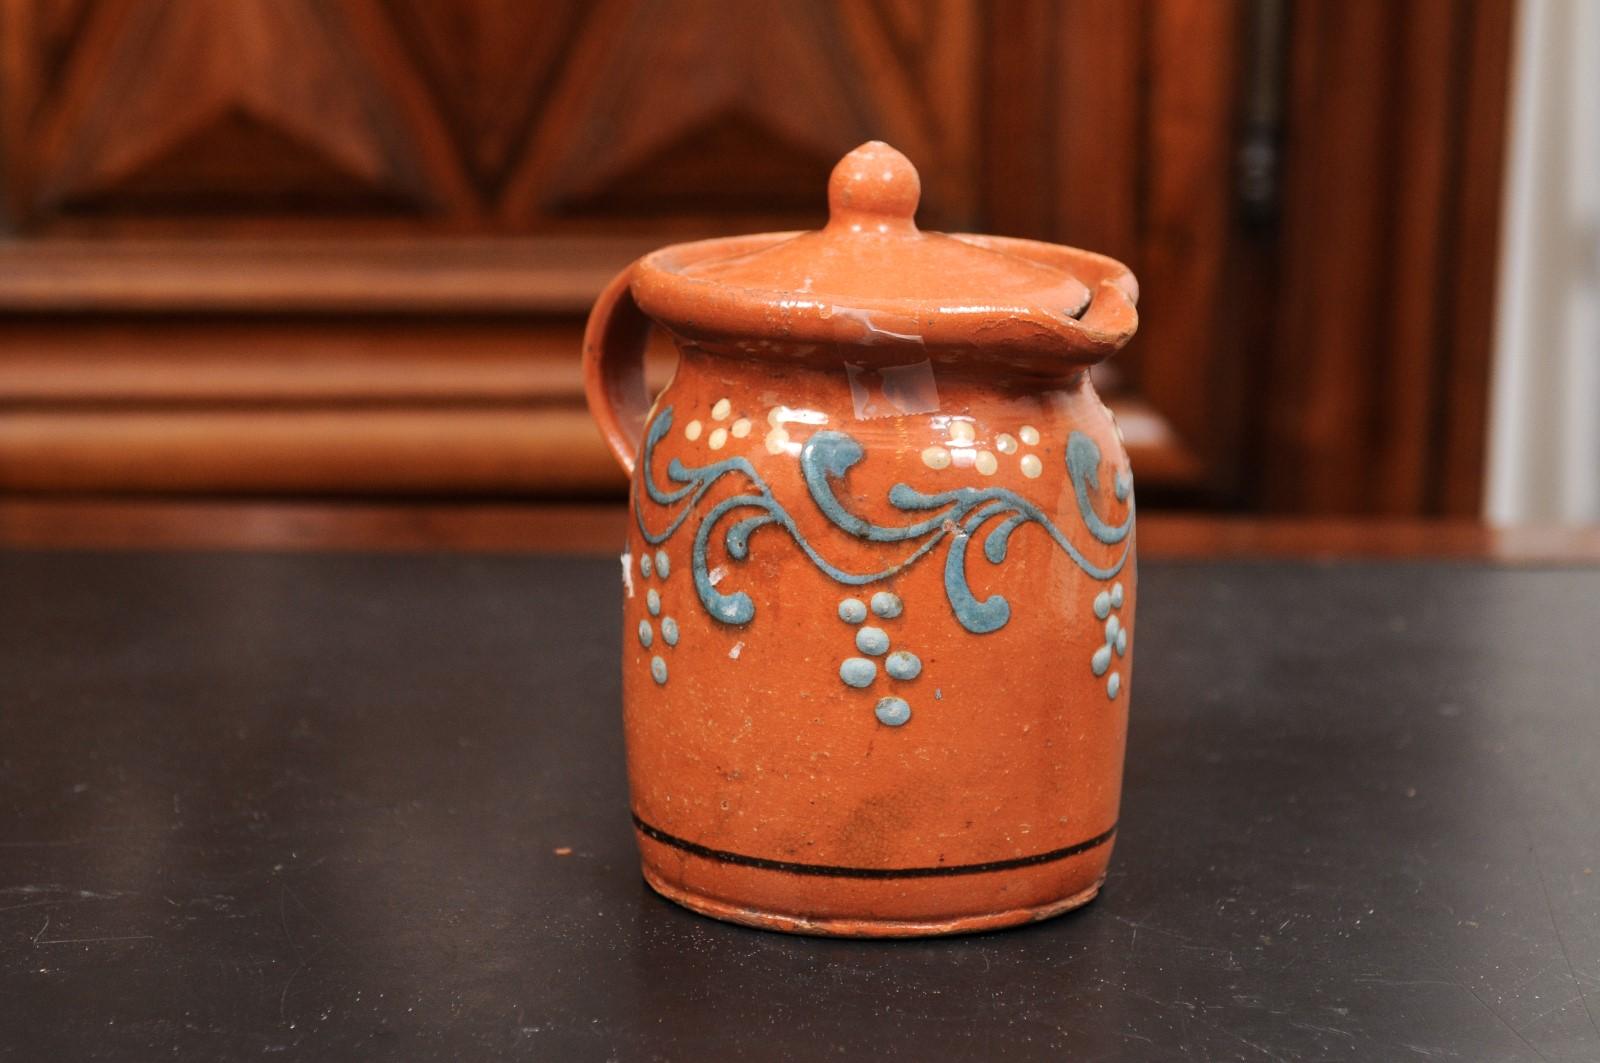 A French pottery lidded pitcher from the 19th century, with orange, cream and blue glaze and foliage motifs. Created in France during the 19th century, this pottery pitcher charms us with its vivid colors and foliage motifs. Presenting a handle in